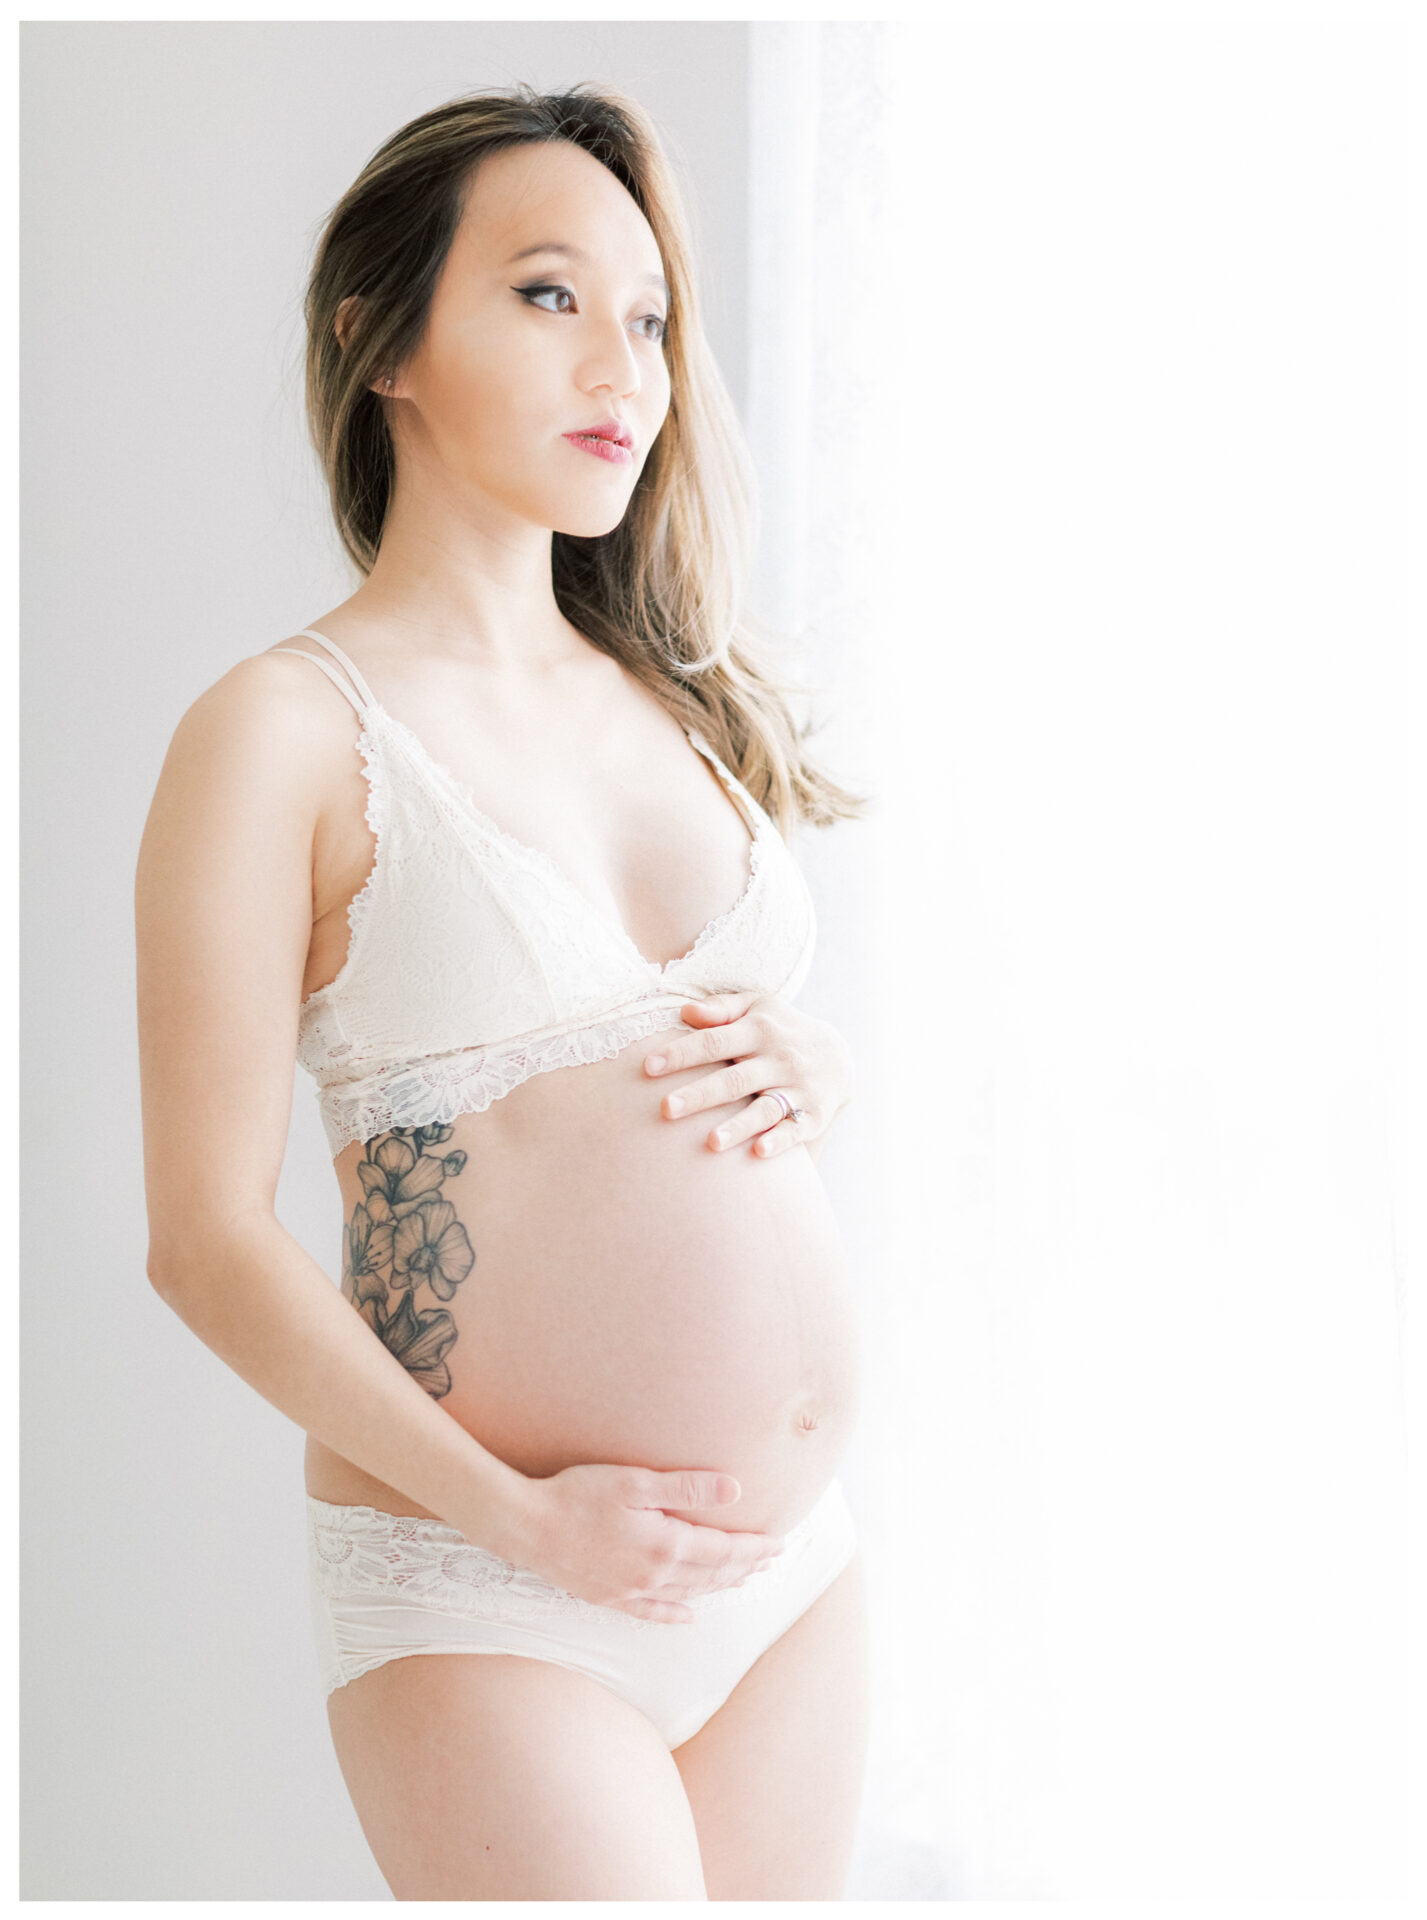 Winter Freire Photography | Fine Art Maternity Boudoir | Expecting mother standing in natural window light